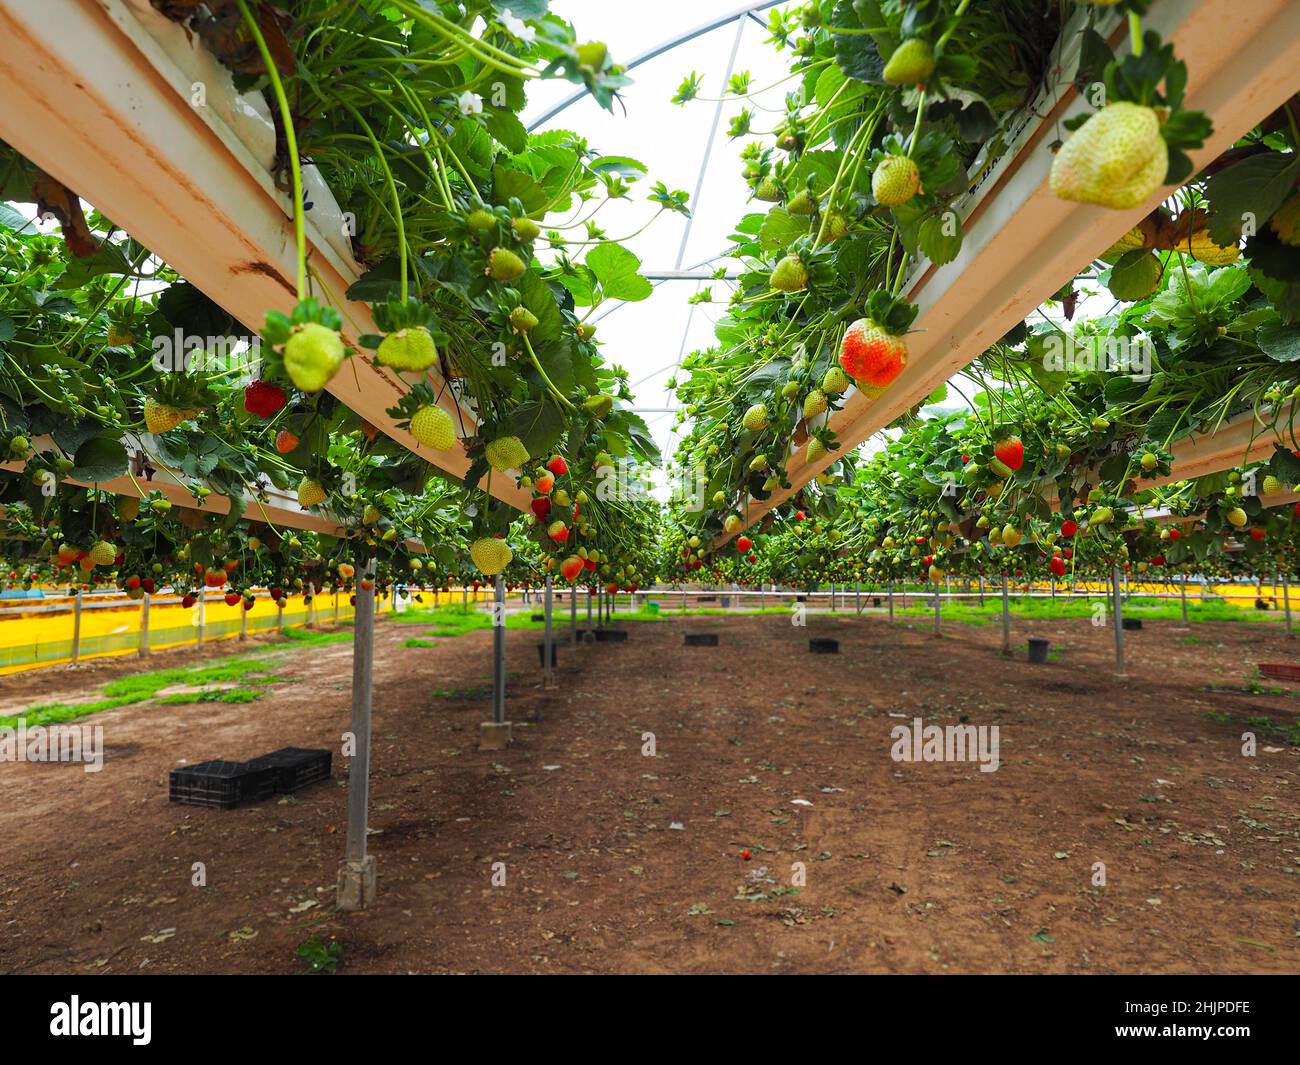 The hanging gardens of strawberry. The modern Israeli technology of berries cultivation in greenhouses. Stock Photo